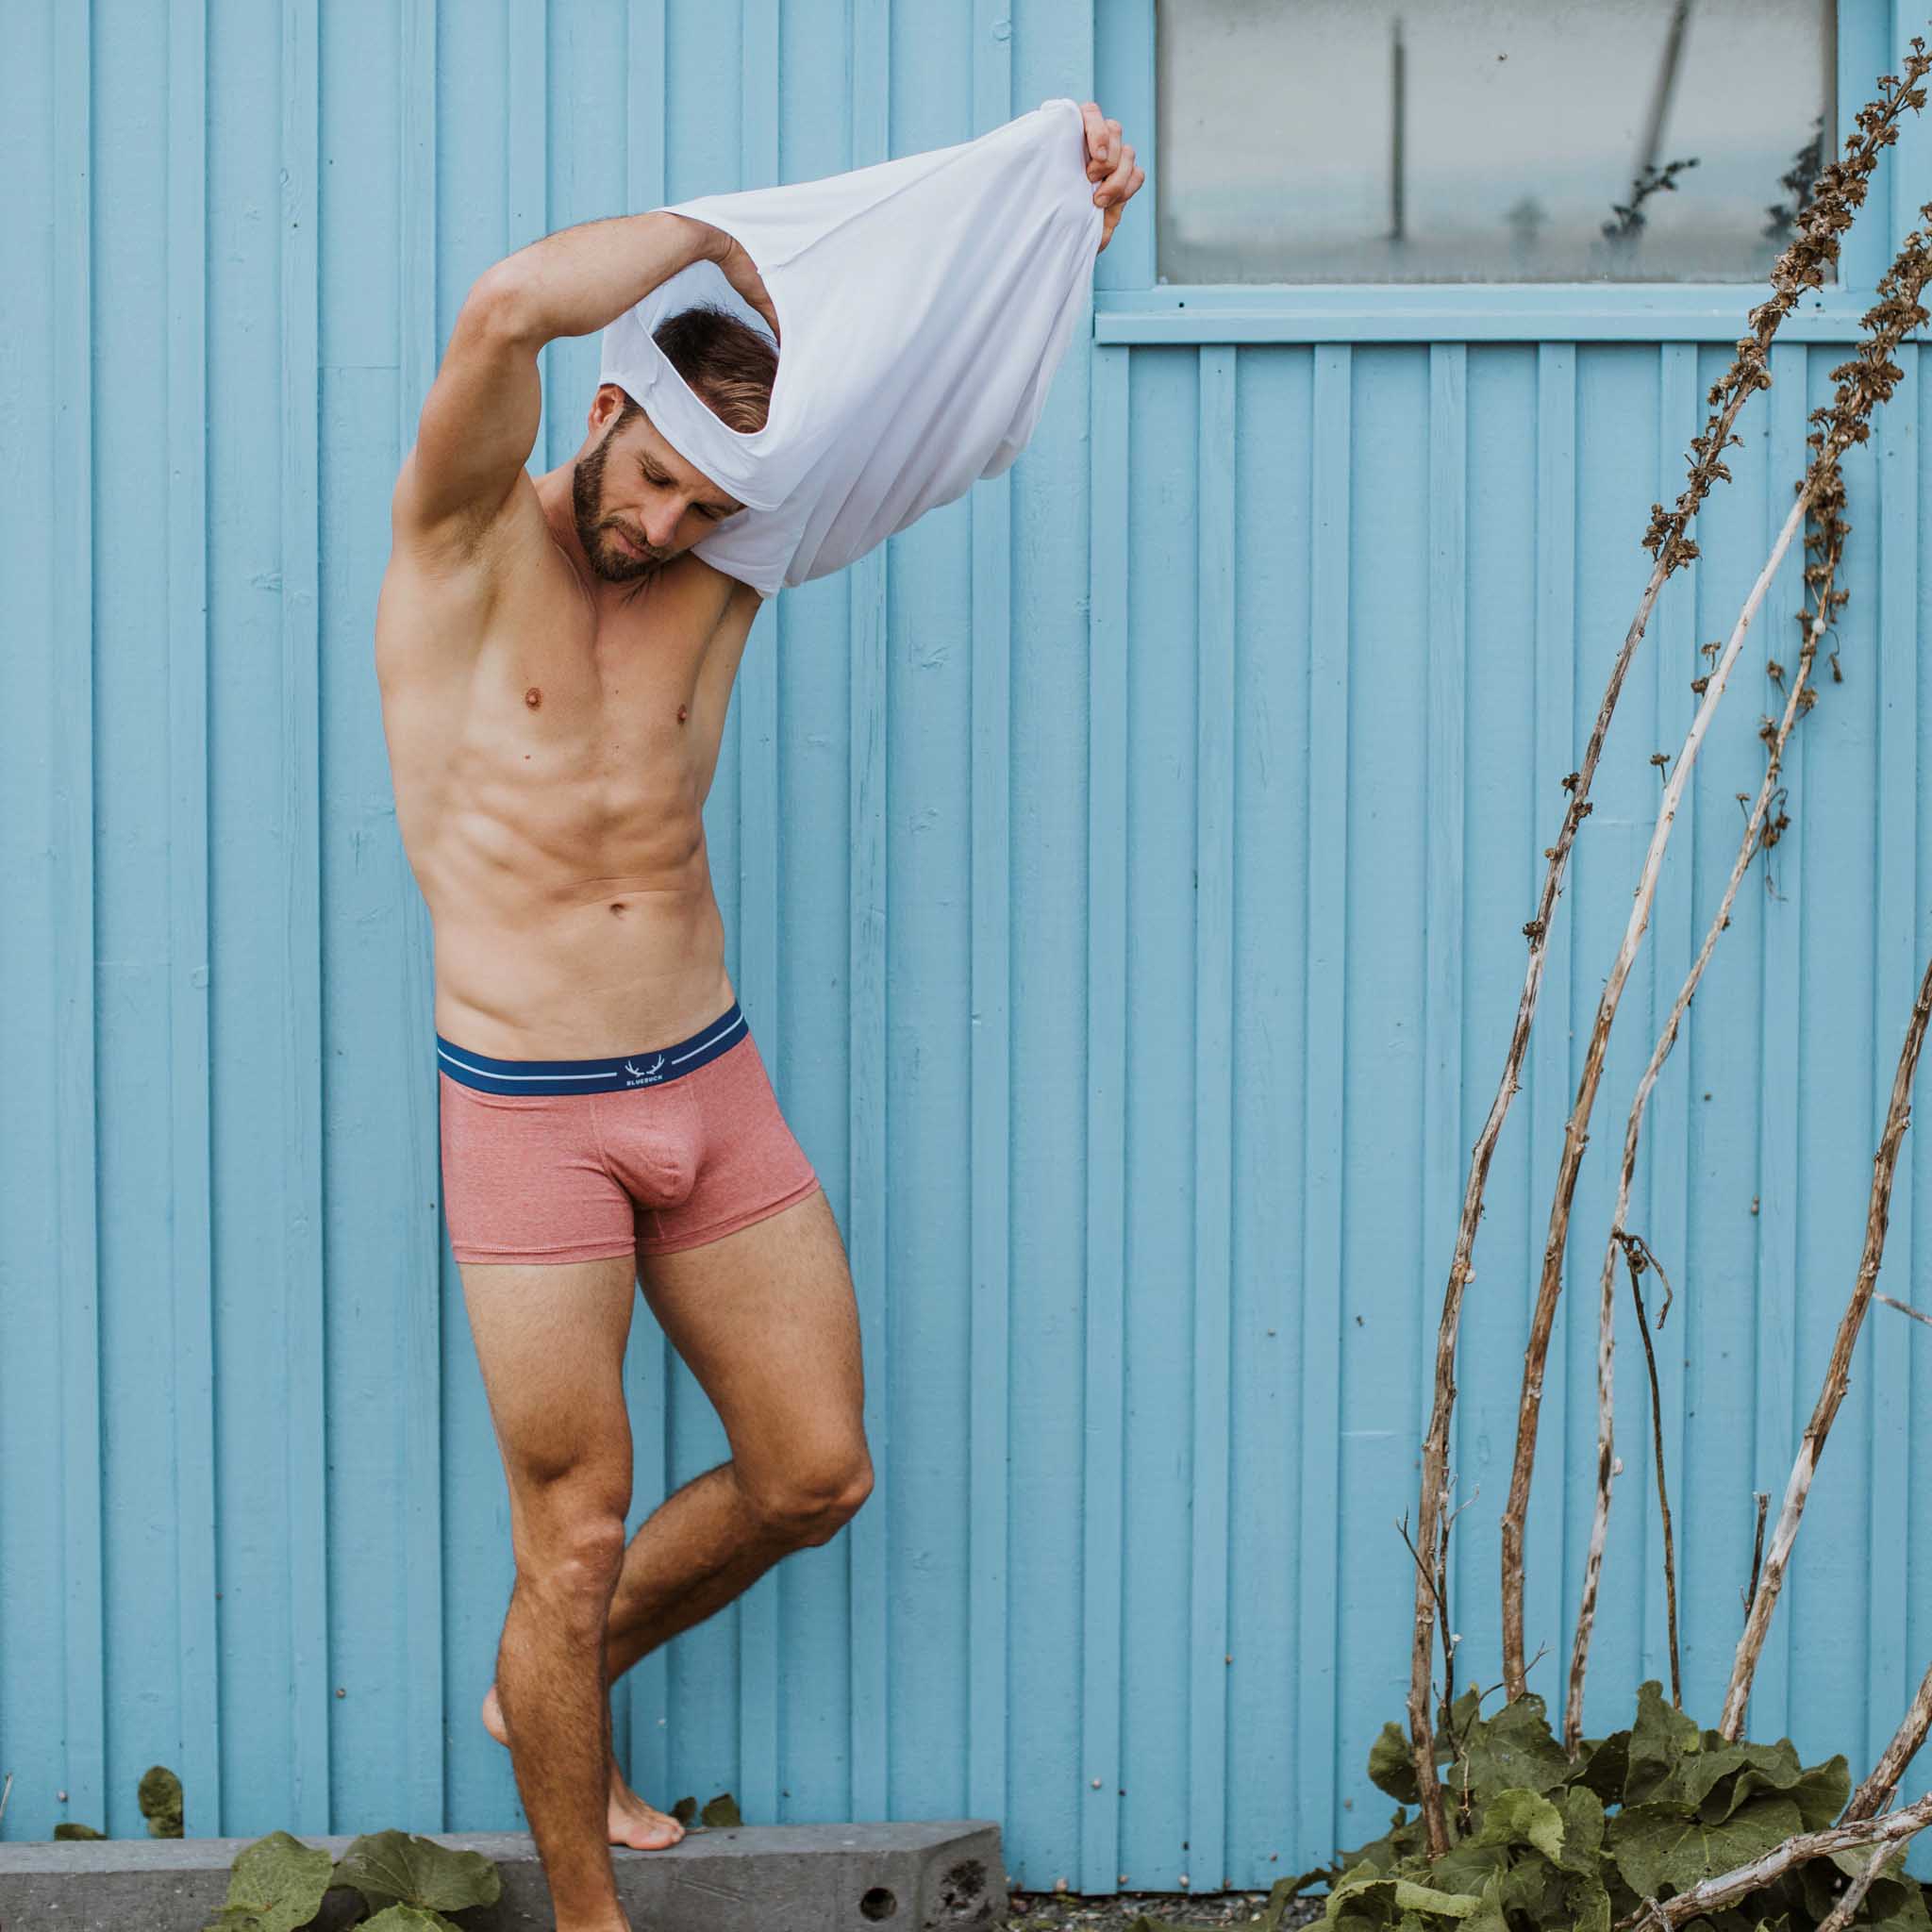 Red organic cotton boxer shorts from Bluebuck